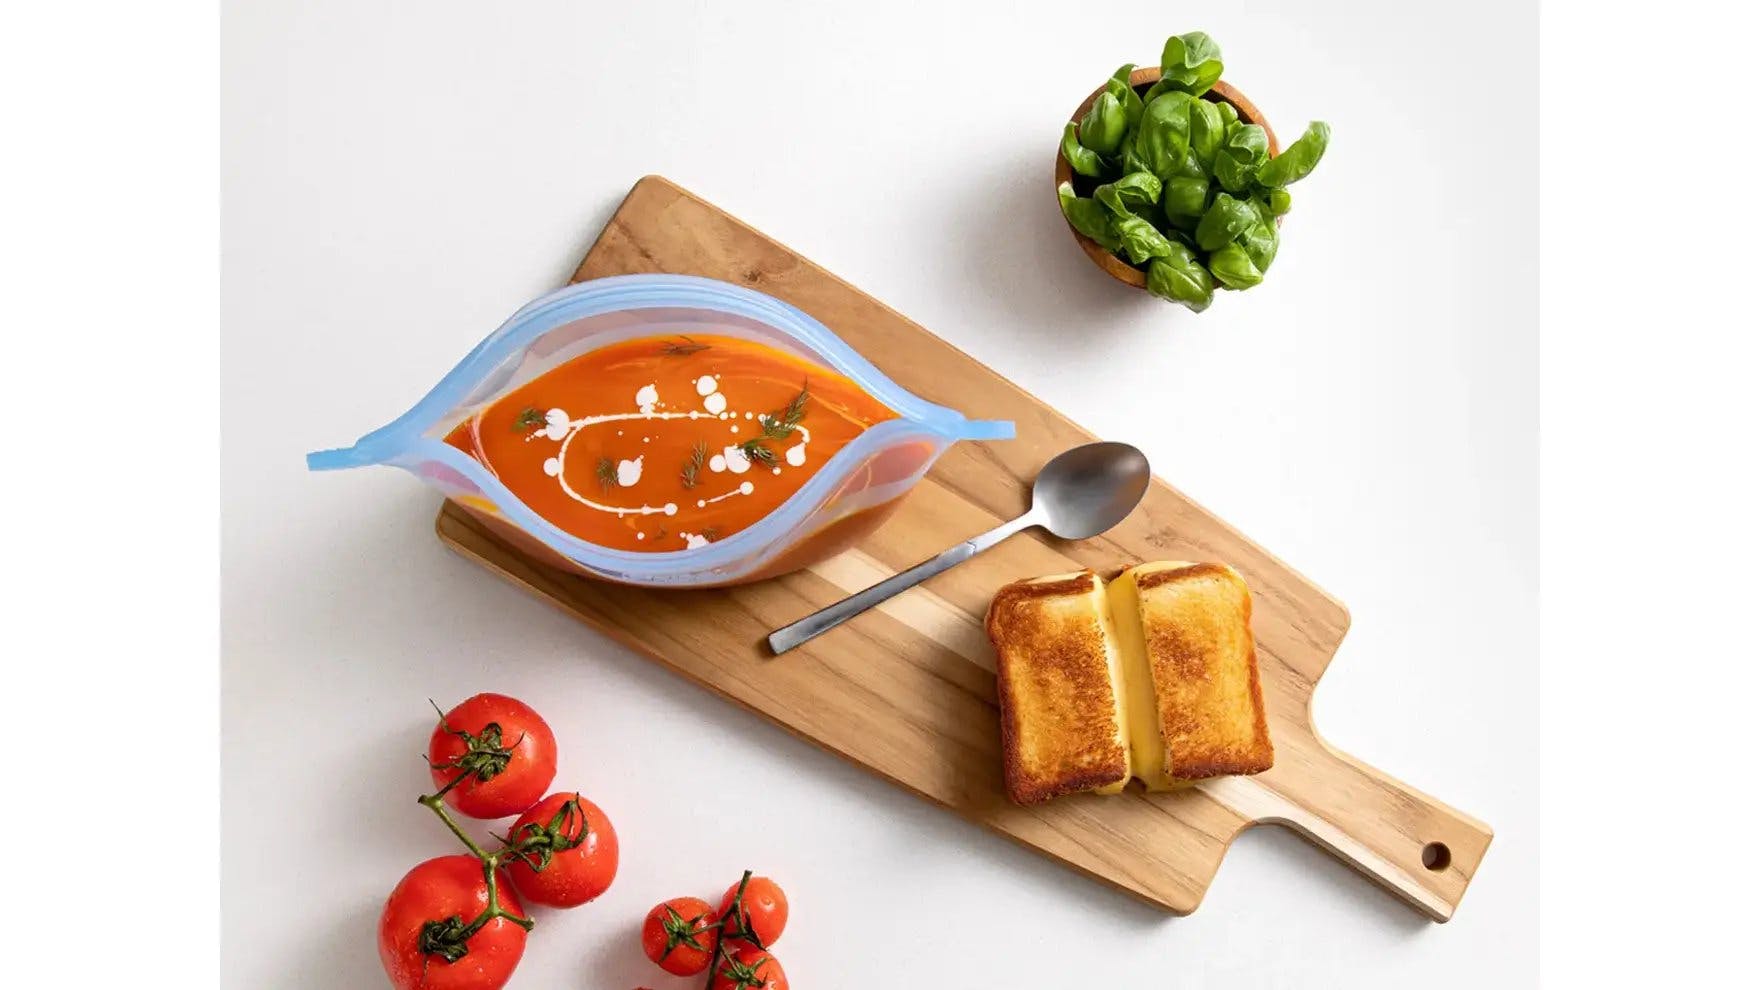 Tomato soup in Ziploc Endurables container with grilled cheese on cutting board.